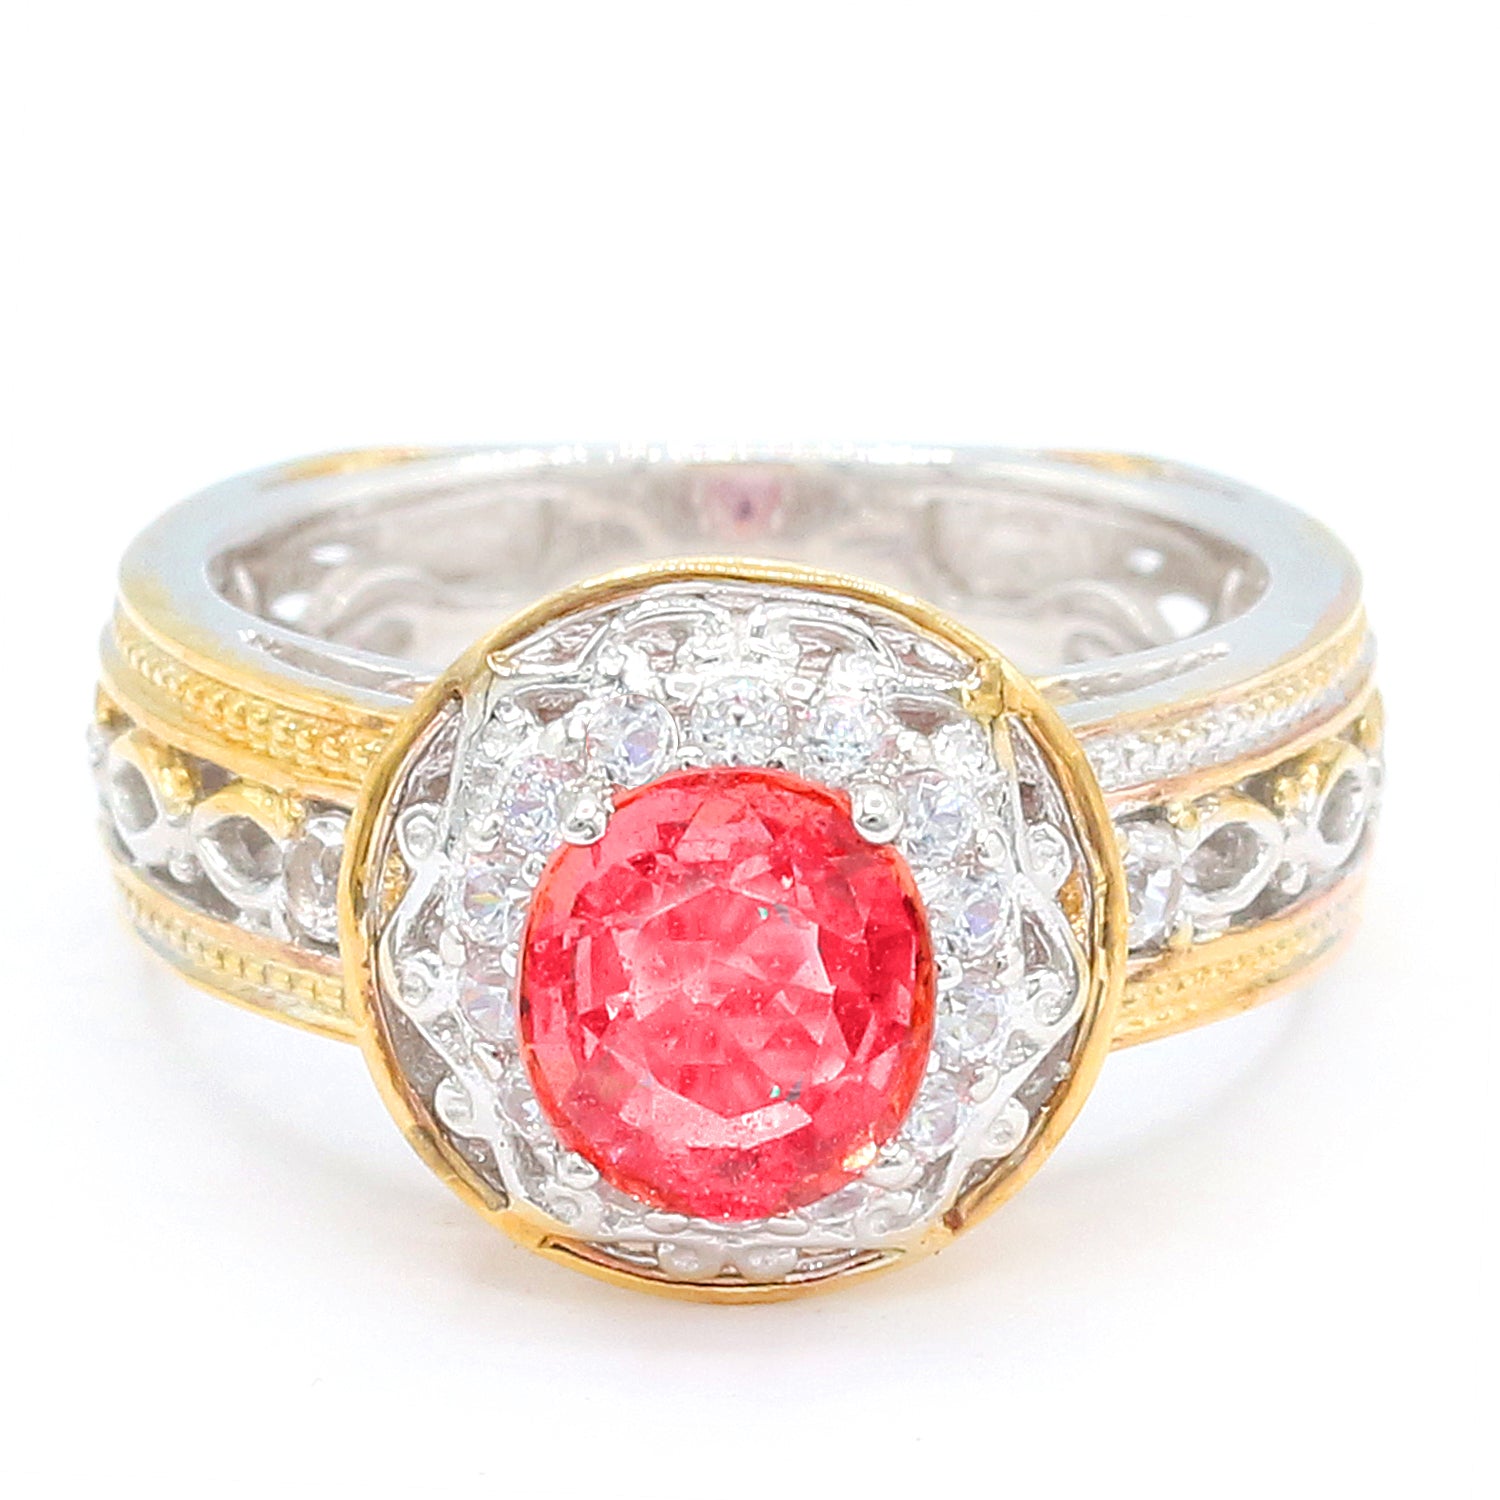 Limited Edition Gems en Vogue Luxe 2.08ctw Padparadscha Sapphire & White Zircon Halo Ring